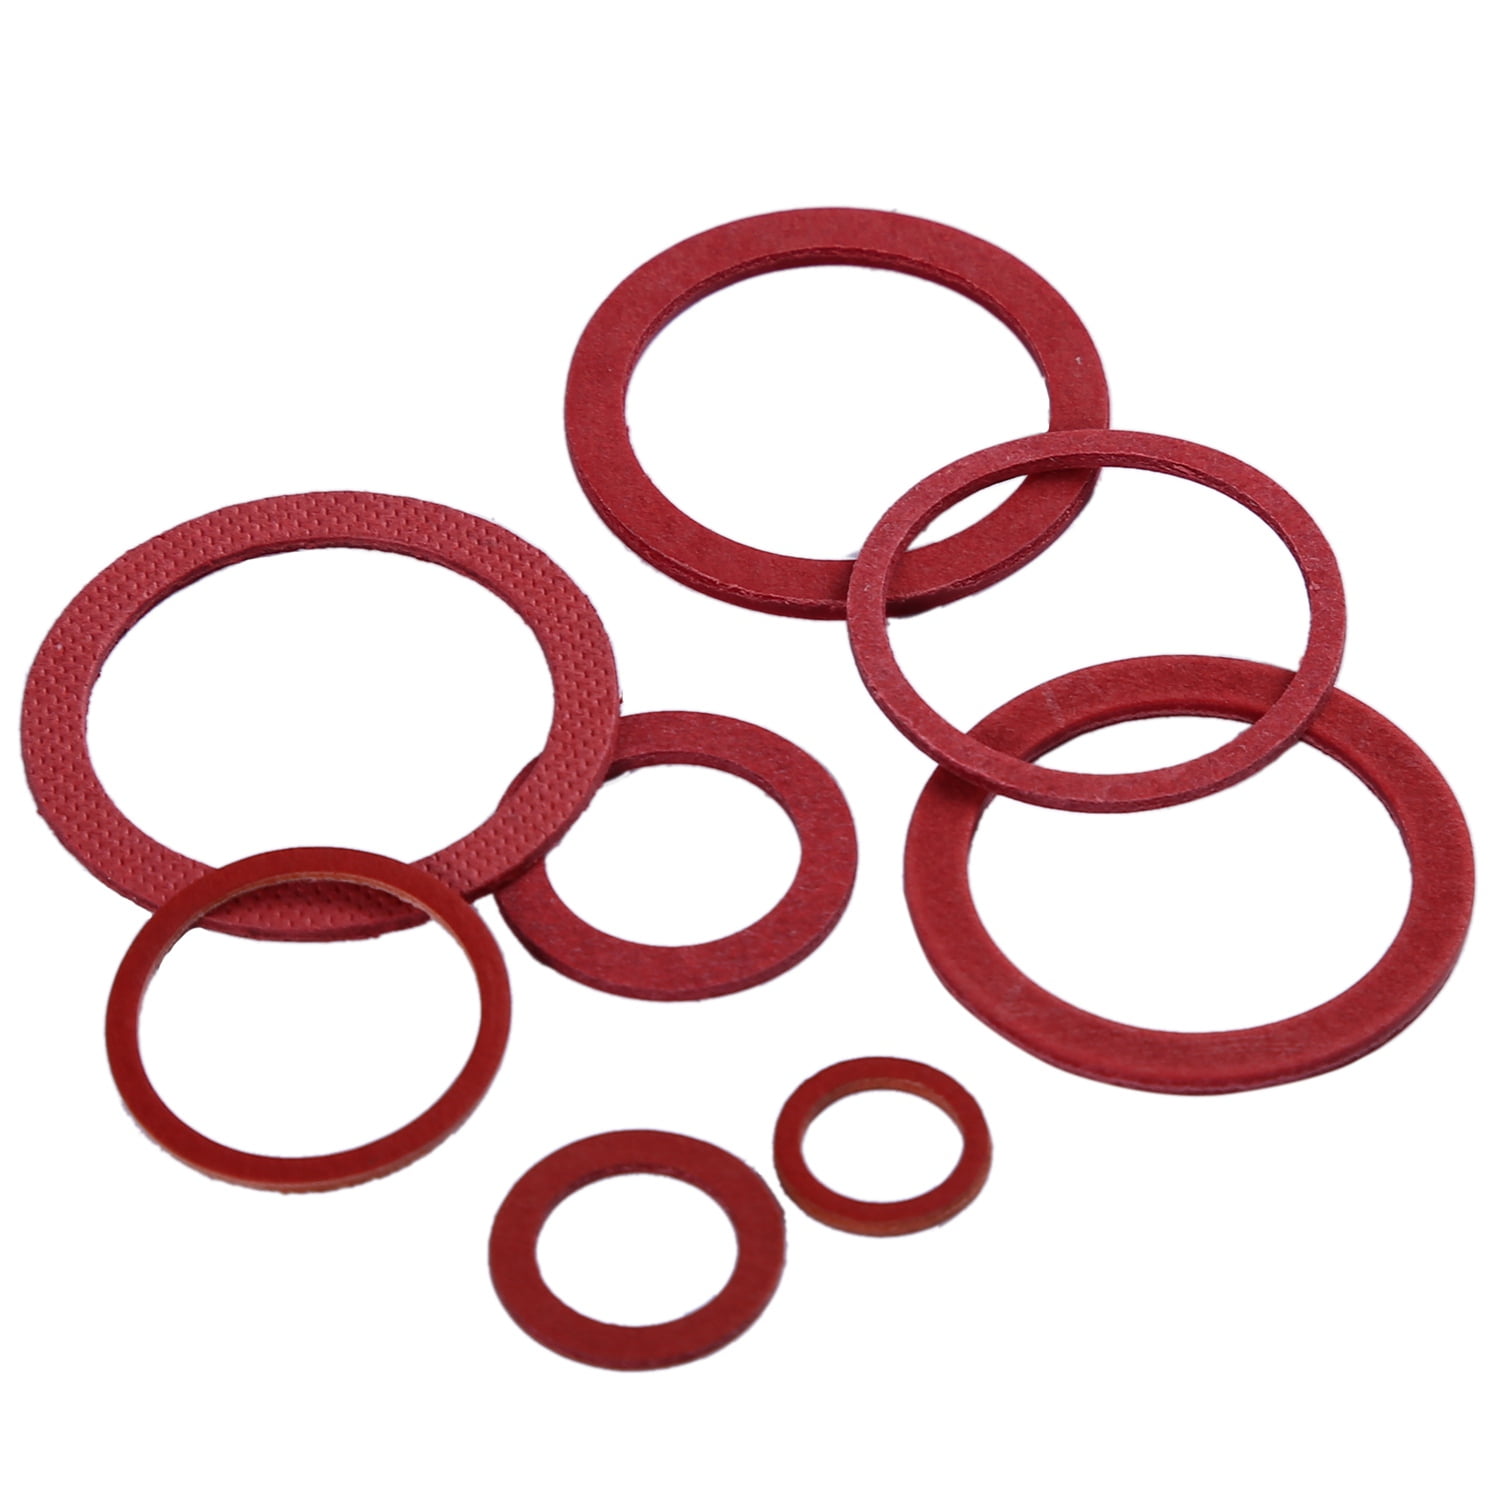 Rubber O-Ring Washer Gaskets Seal Assortment Kit 8 Sizes Black Insulation Sealing  Ring Rubber Flat Washer Gasket Assortment Kit M3 M4 M5 M6 M8 M10 M15 M20  Home Improvement Metric Nitrile Rubber